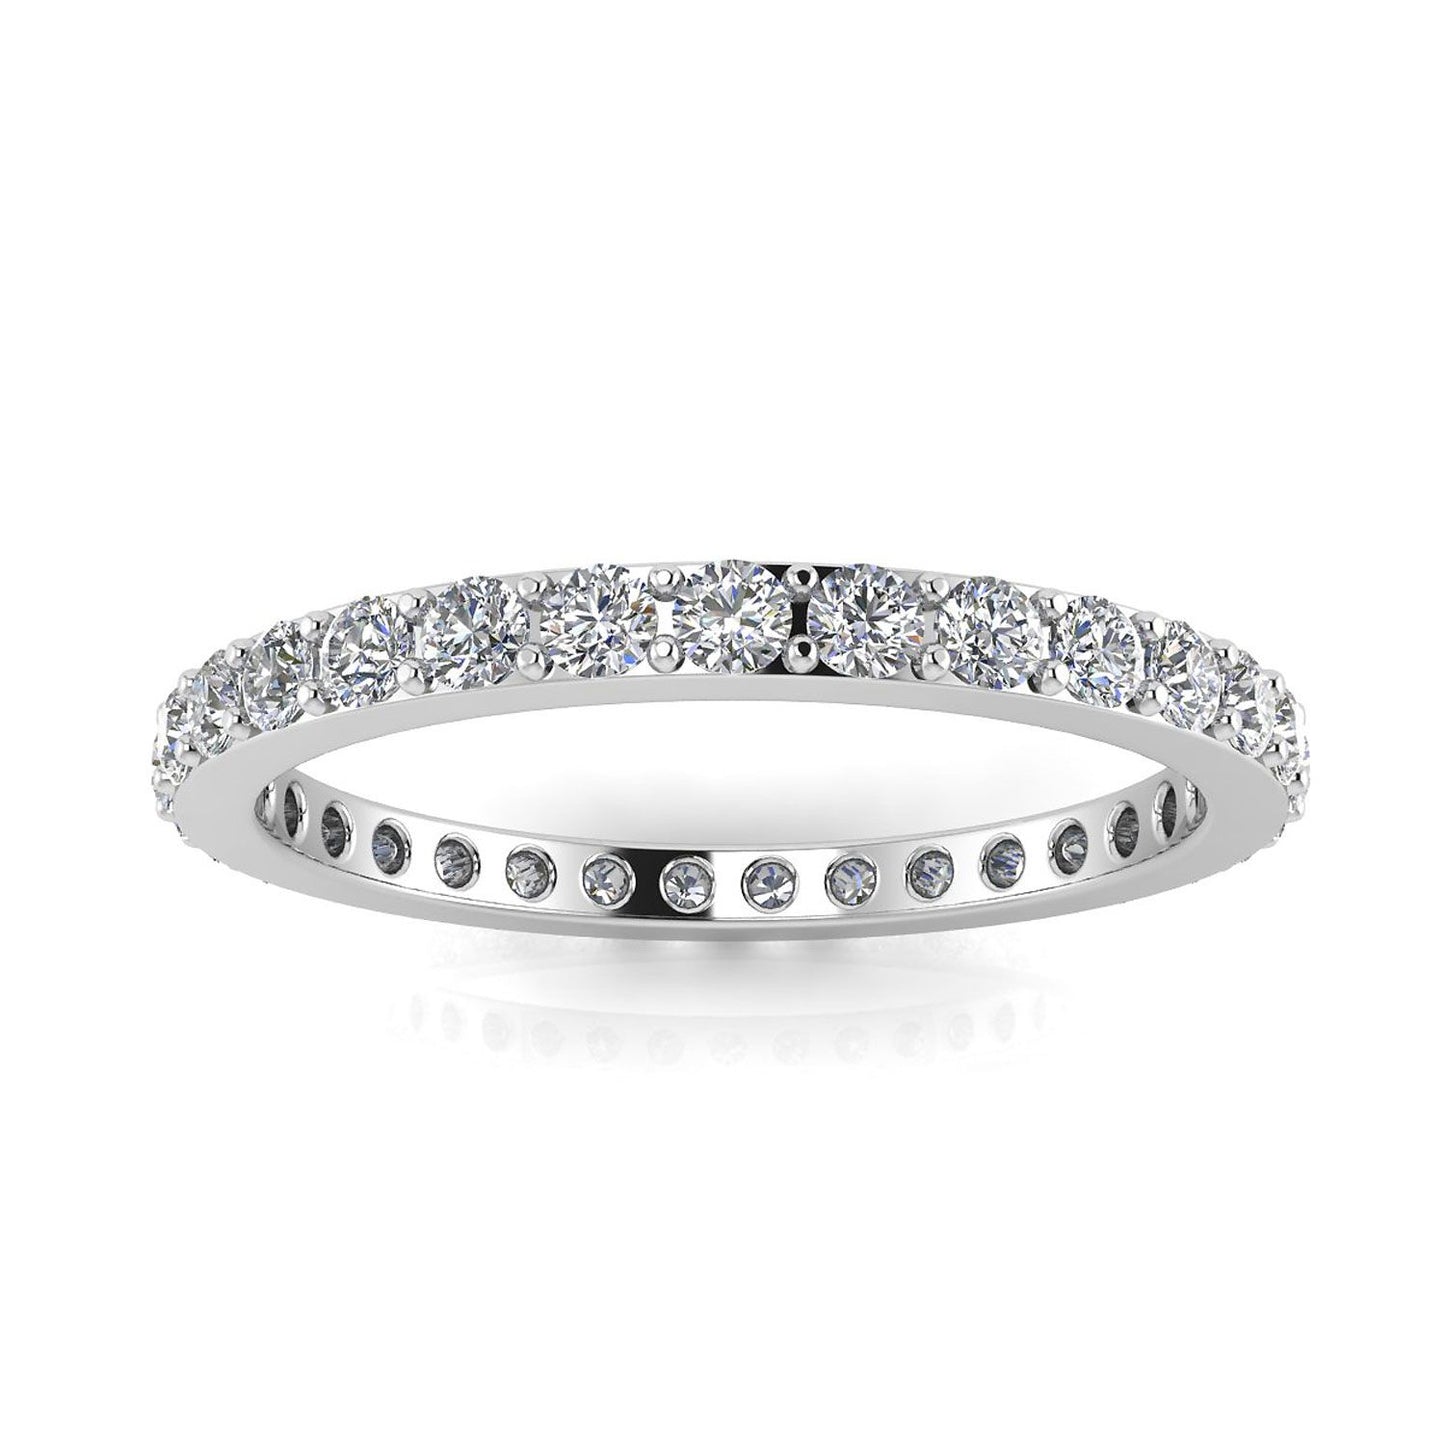 Round Brilliant Cut Diamond Pave Set Eternity Ring In 14k White Gold  (0.96ct. Tw.) Ring Size 7.5